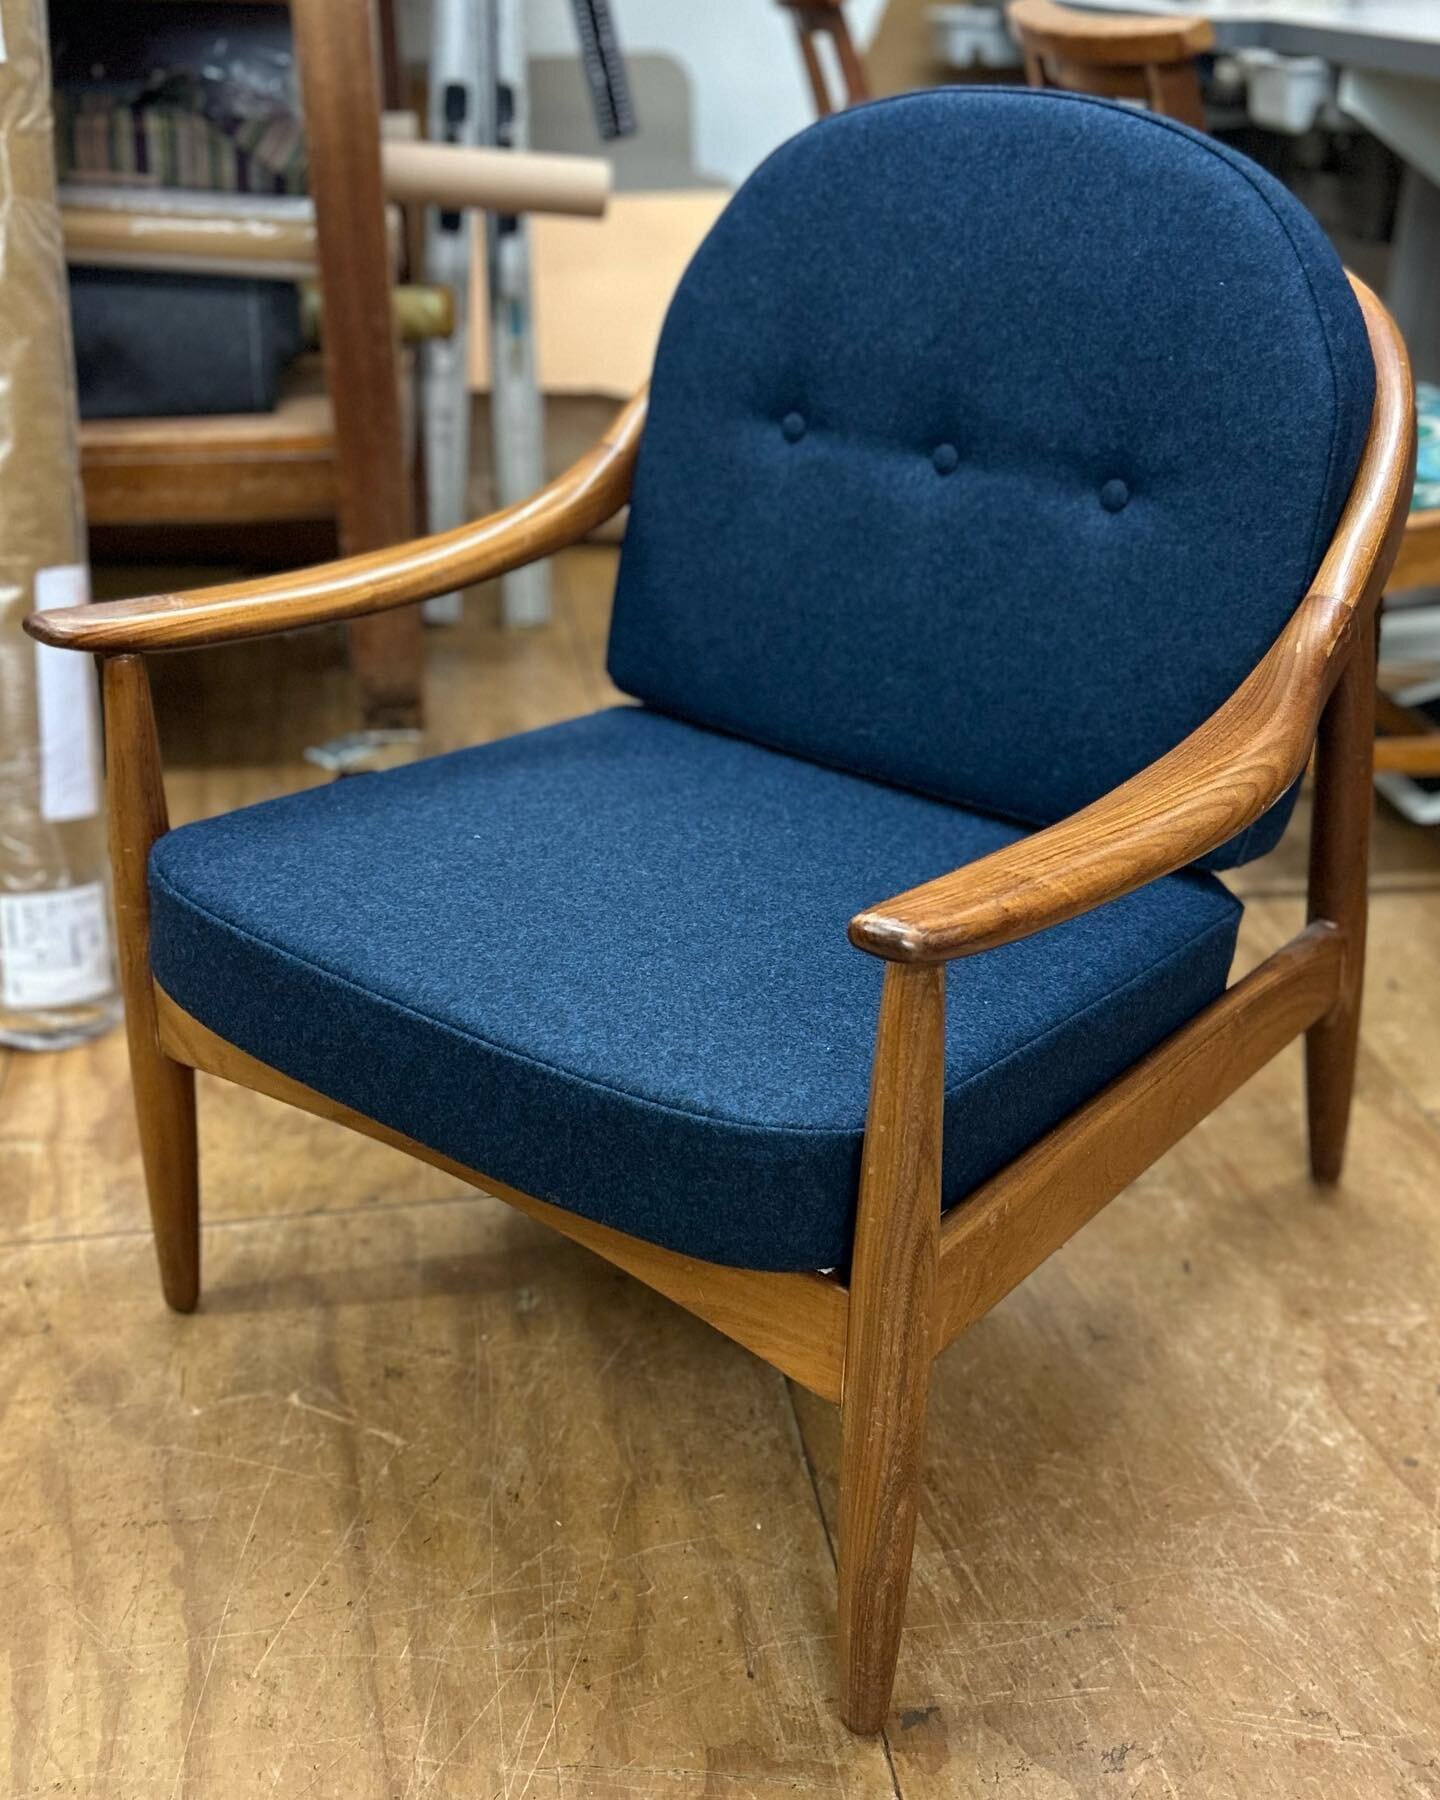 Sometimes the simple jobs are super satisfying. New firm webbing and cushions for this pair of Greaves and Thomas chairs, fabric is @camirafabrics Blazer. Swipe for the before.
.
.
.
#greavesandthomas #midcenturymodern #midcenturychair #interiordesig